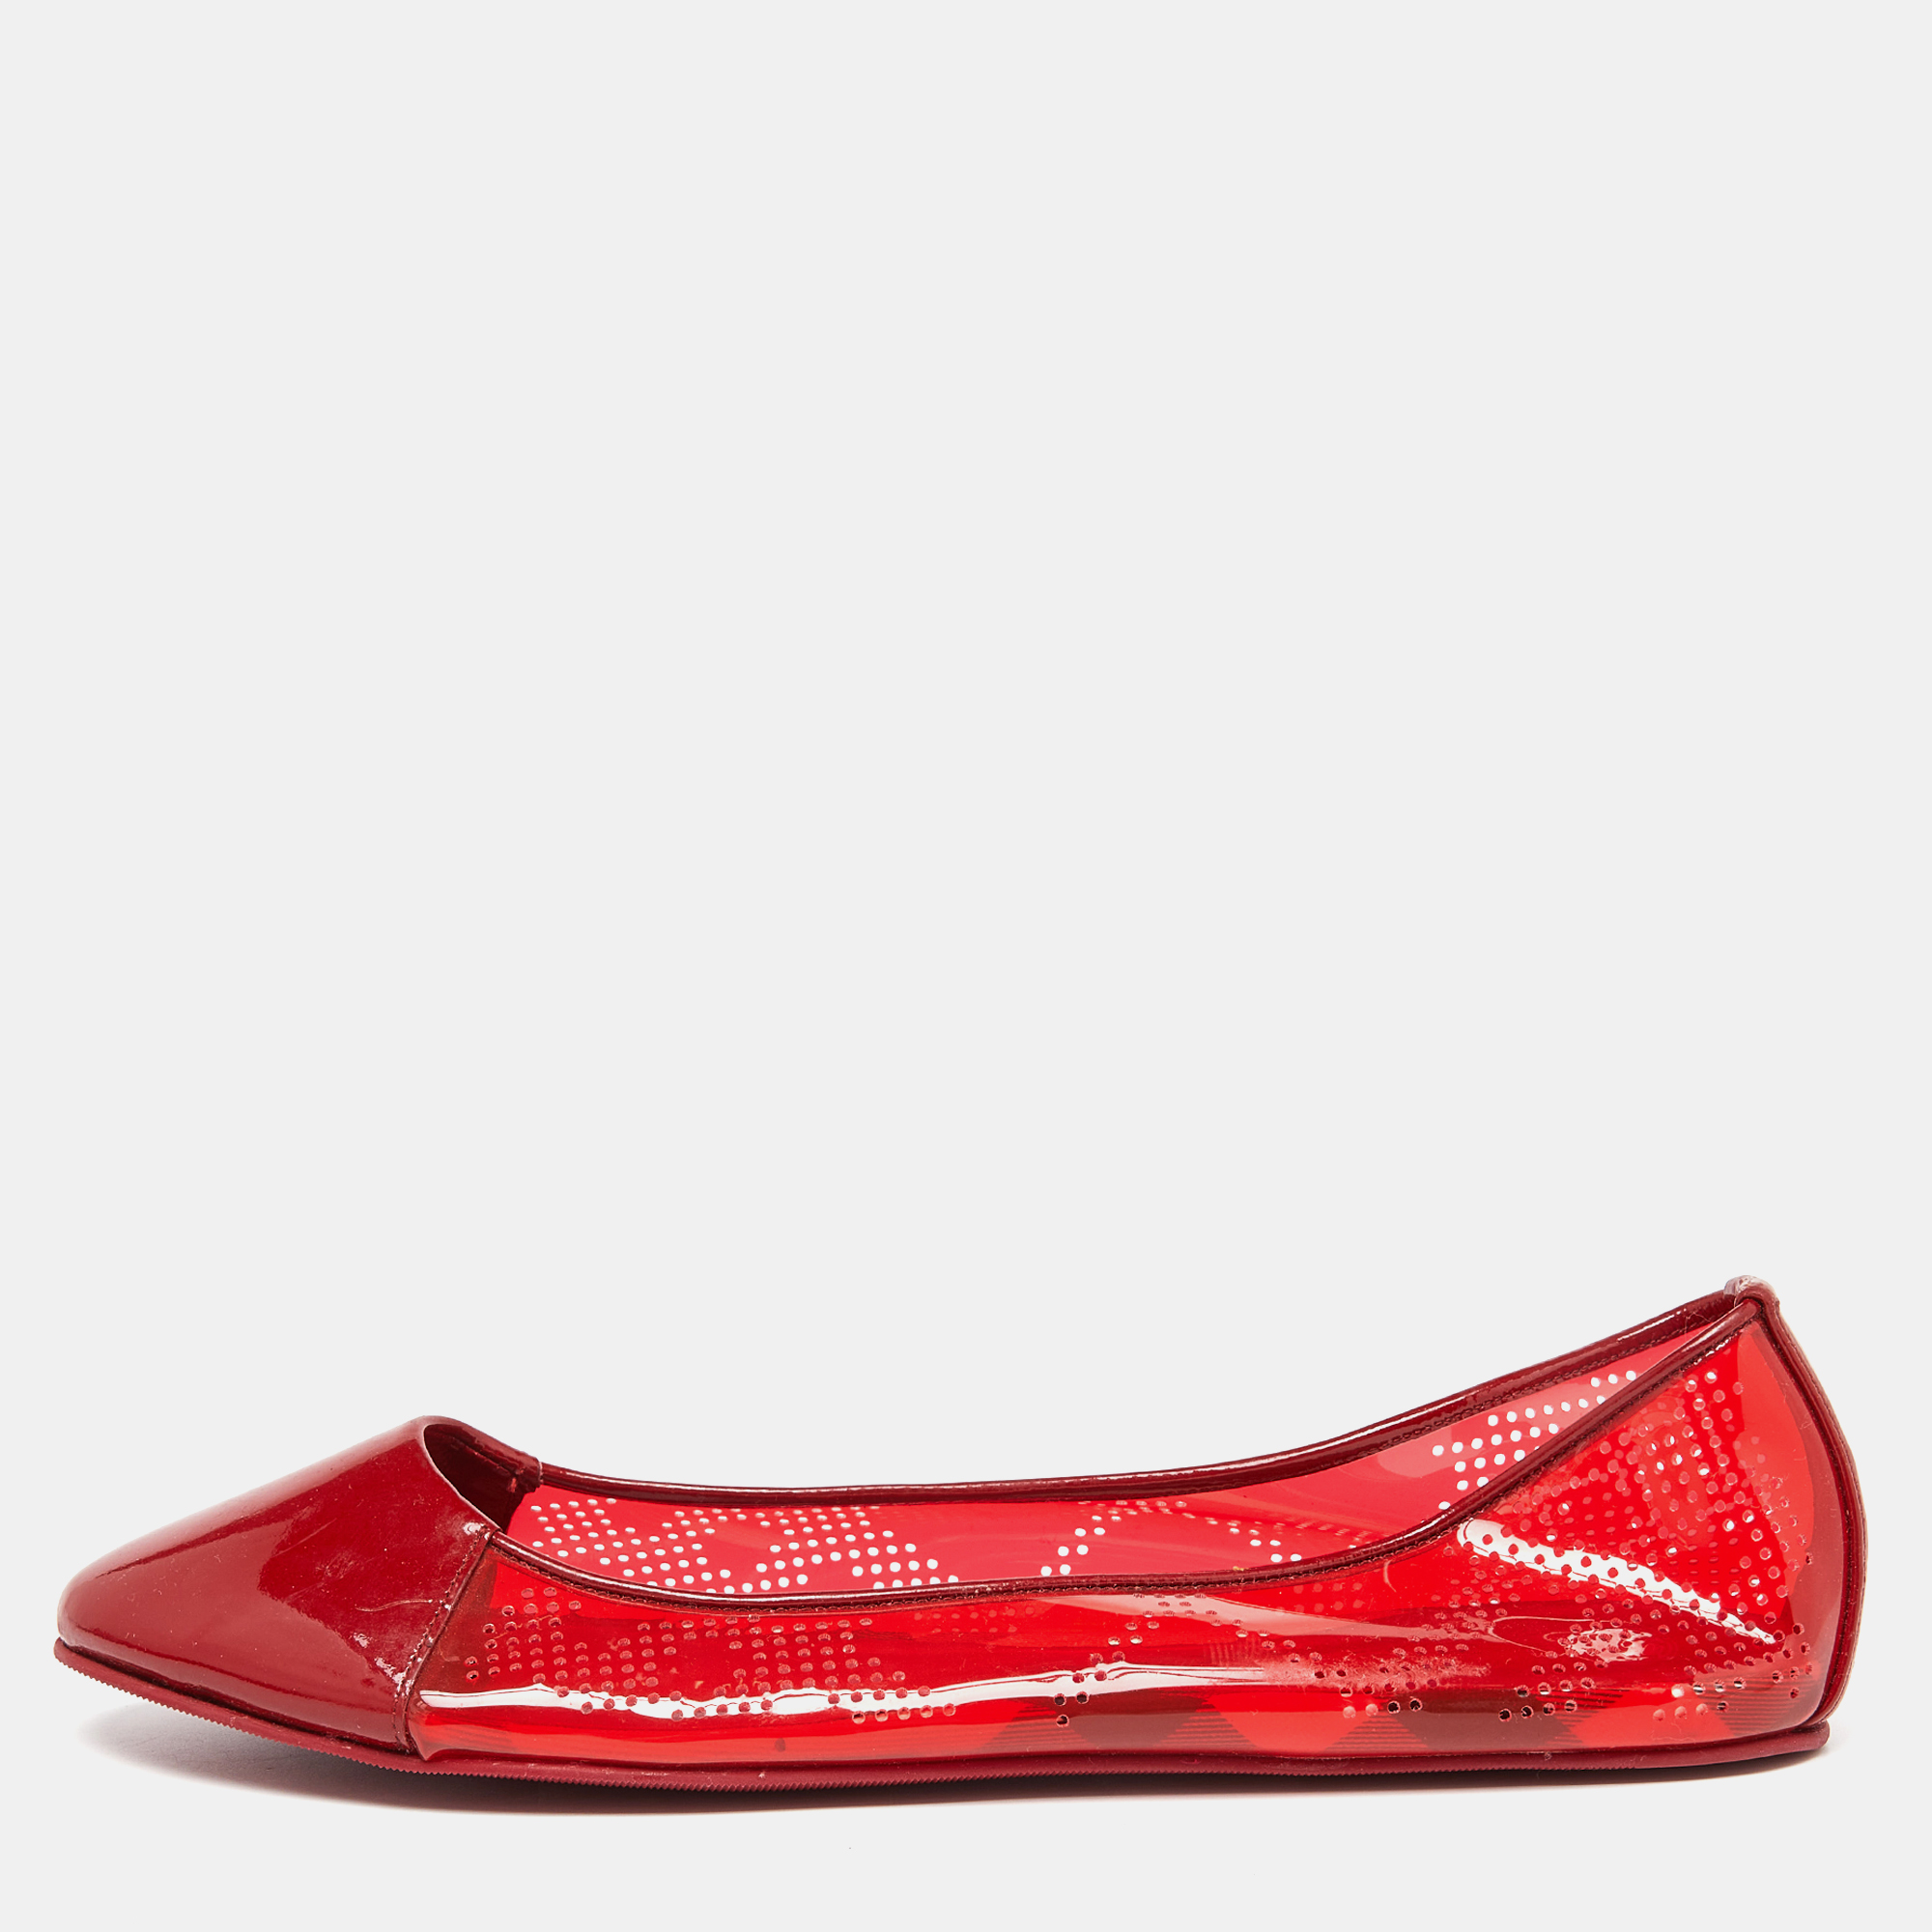 Burberry red pvc and patent cap toe ballet flats size 41